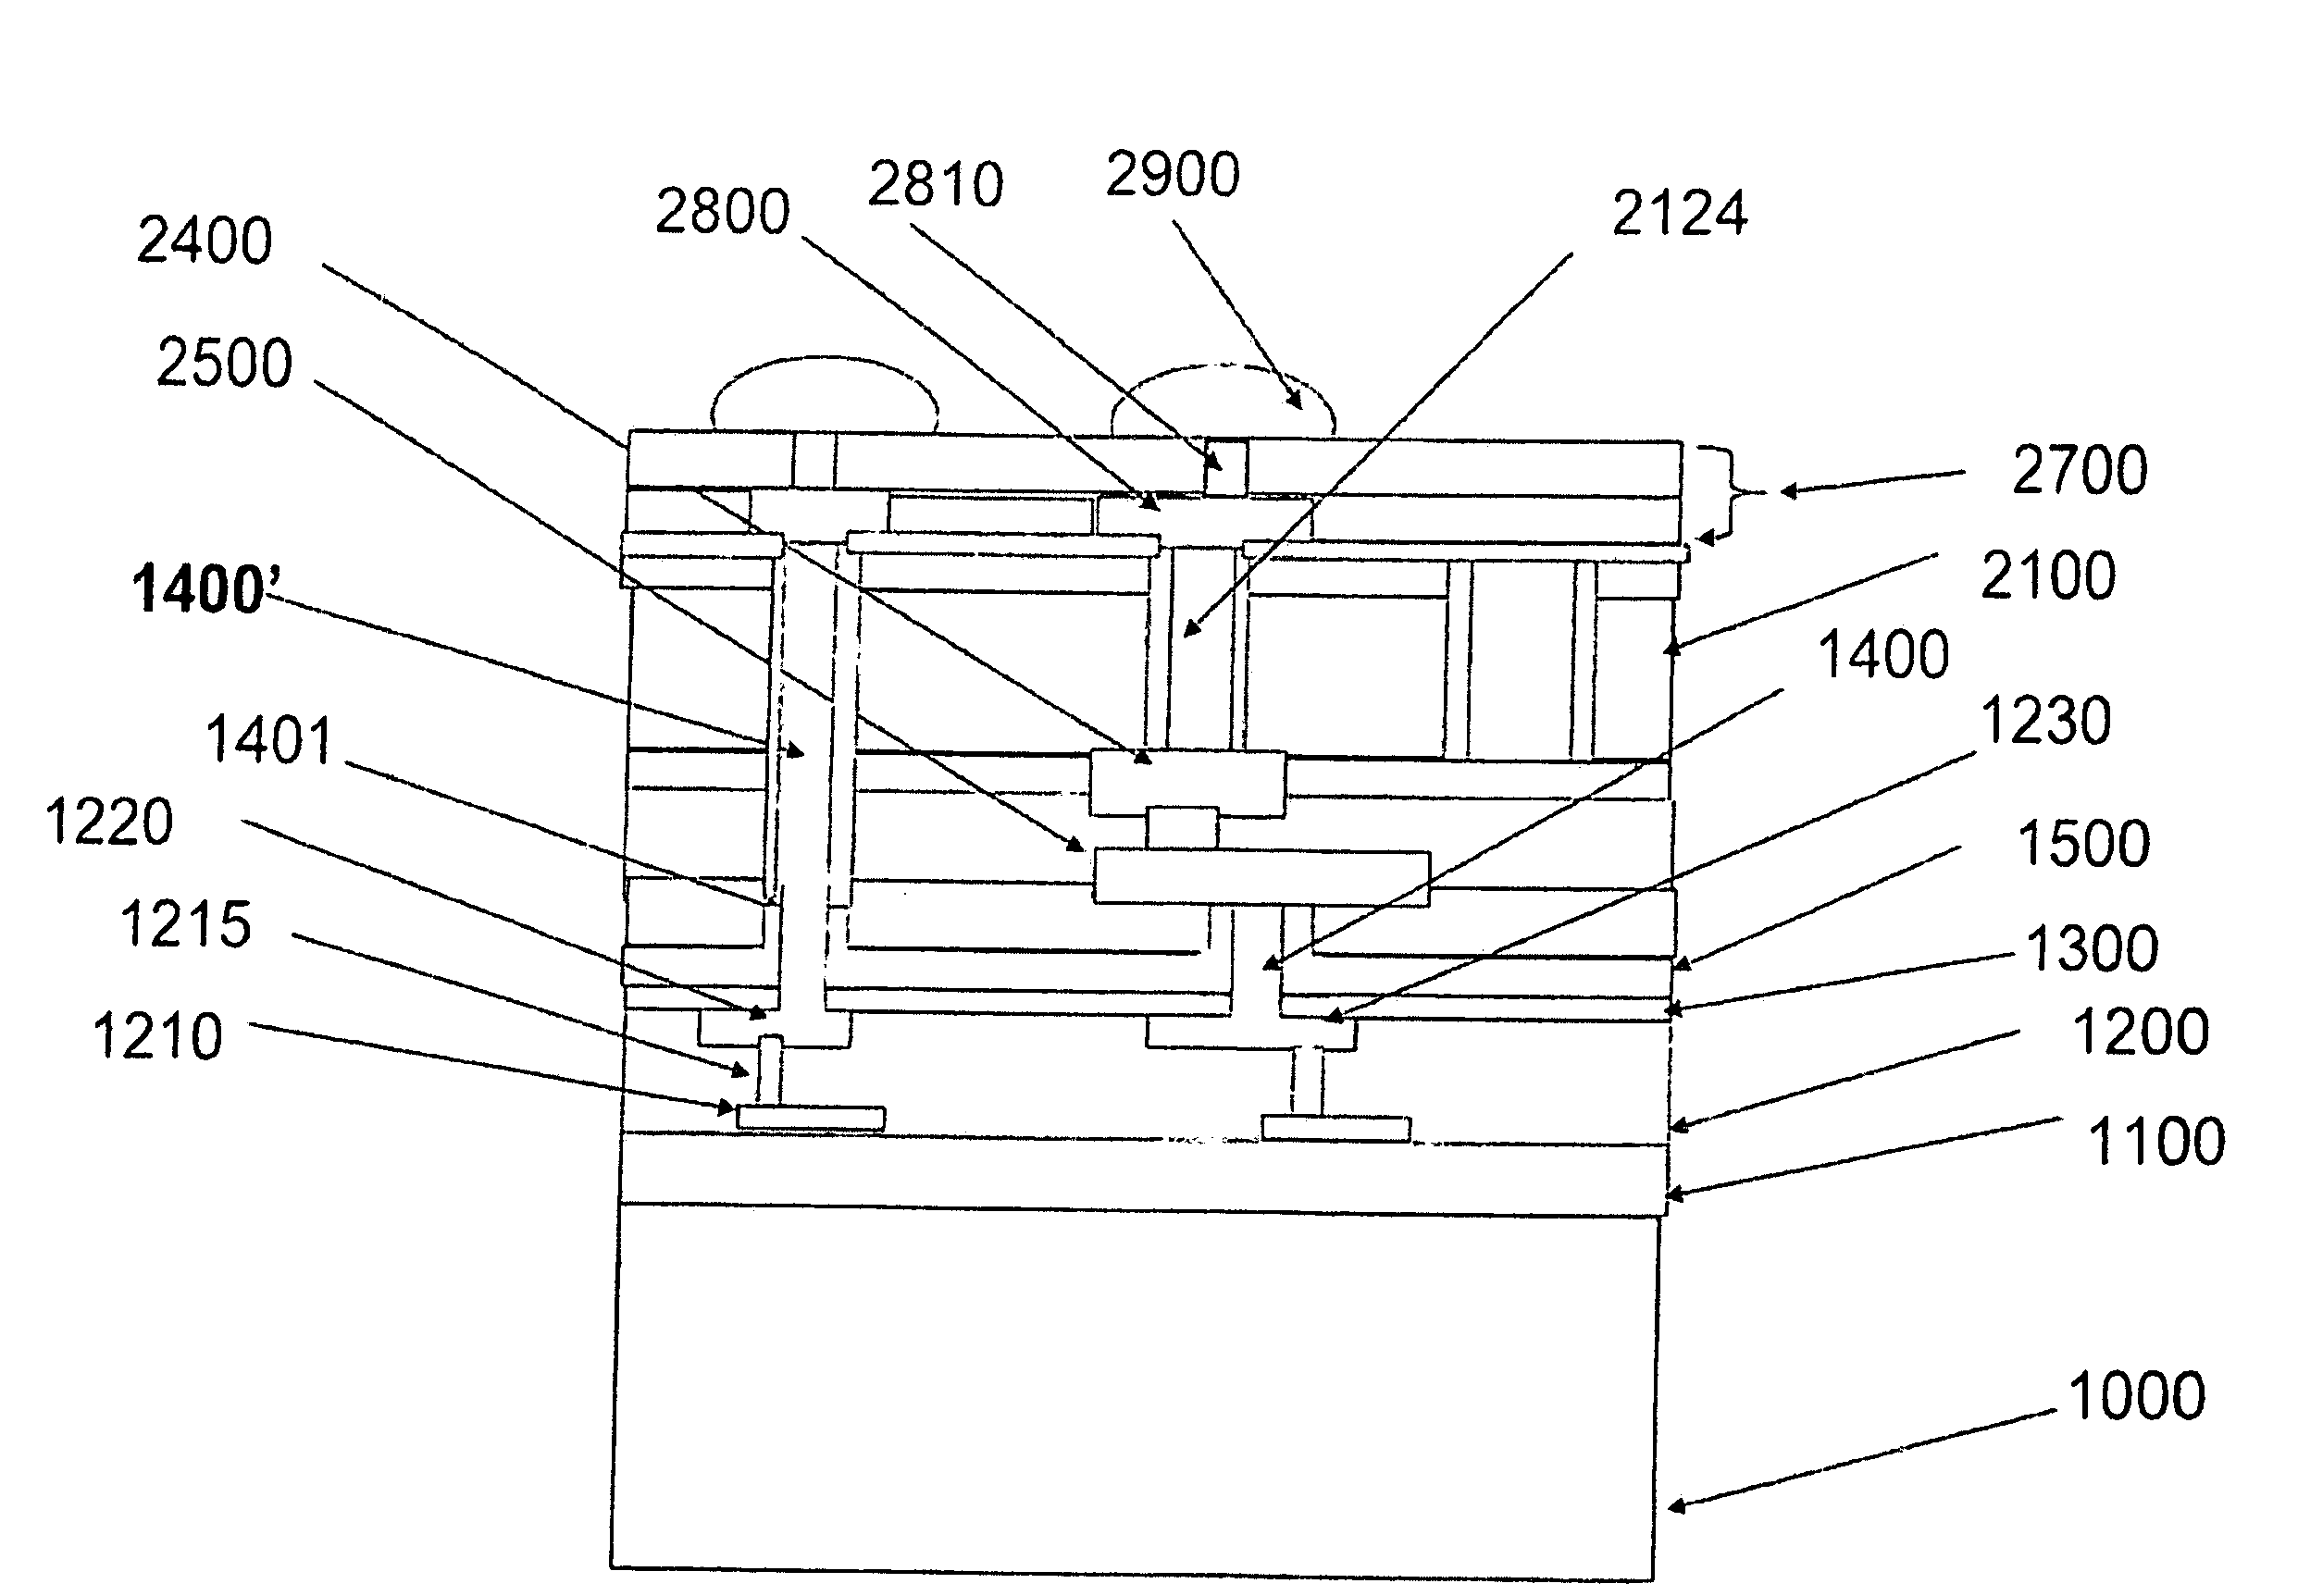 Lock and Key Through-Via Method for Wafer Level 3 D Integration and Structures Produced